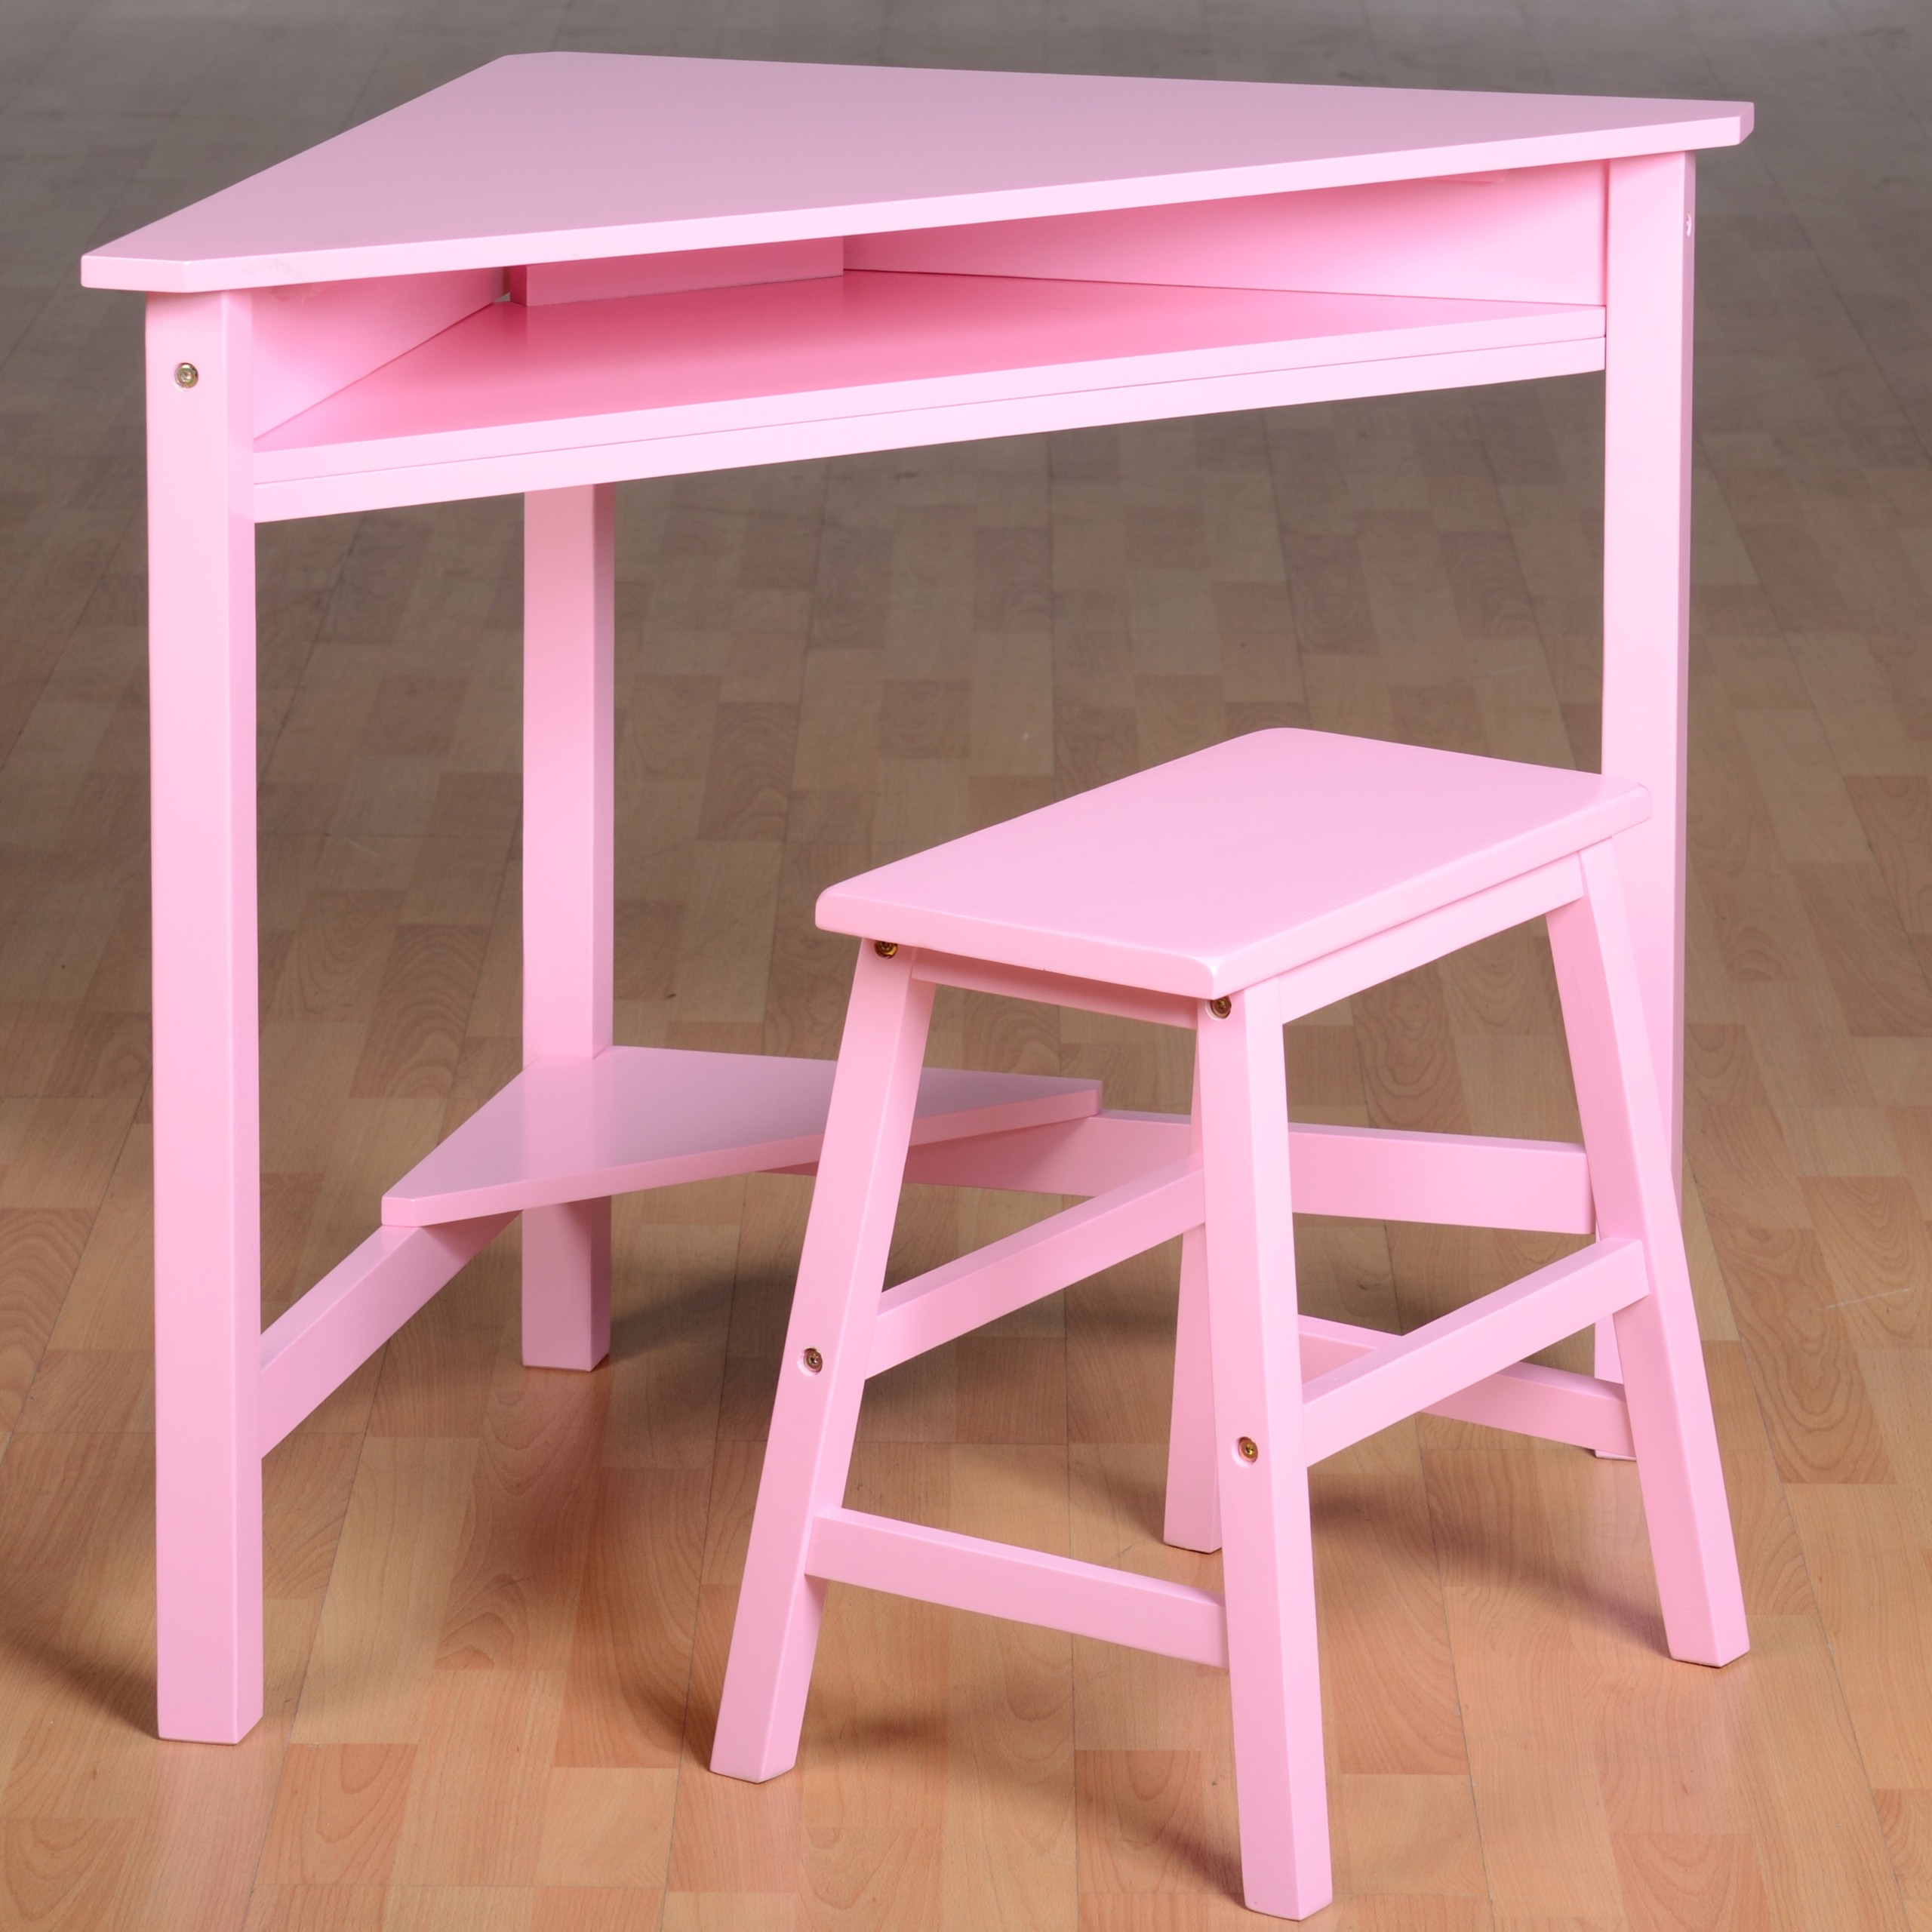 Kid desk with chair design homesfeed